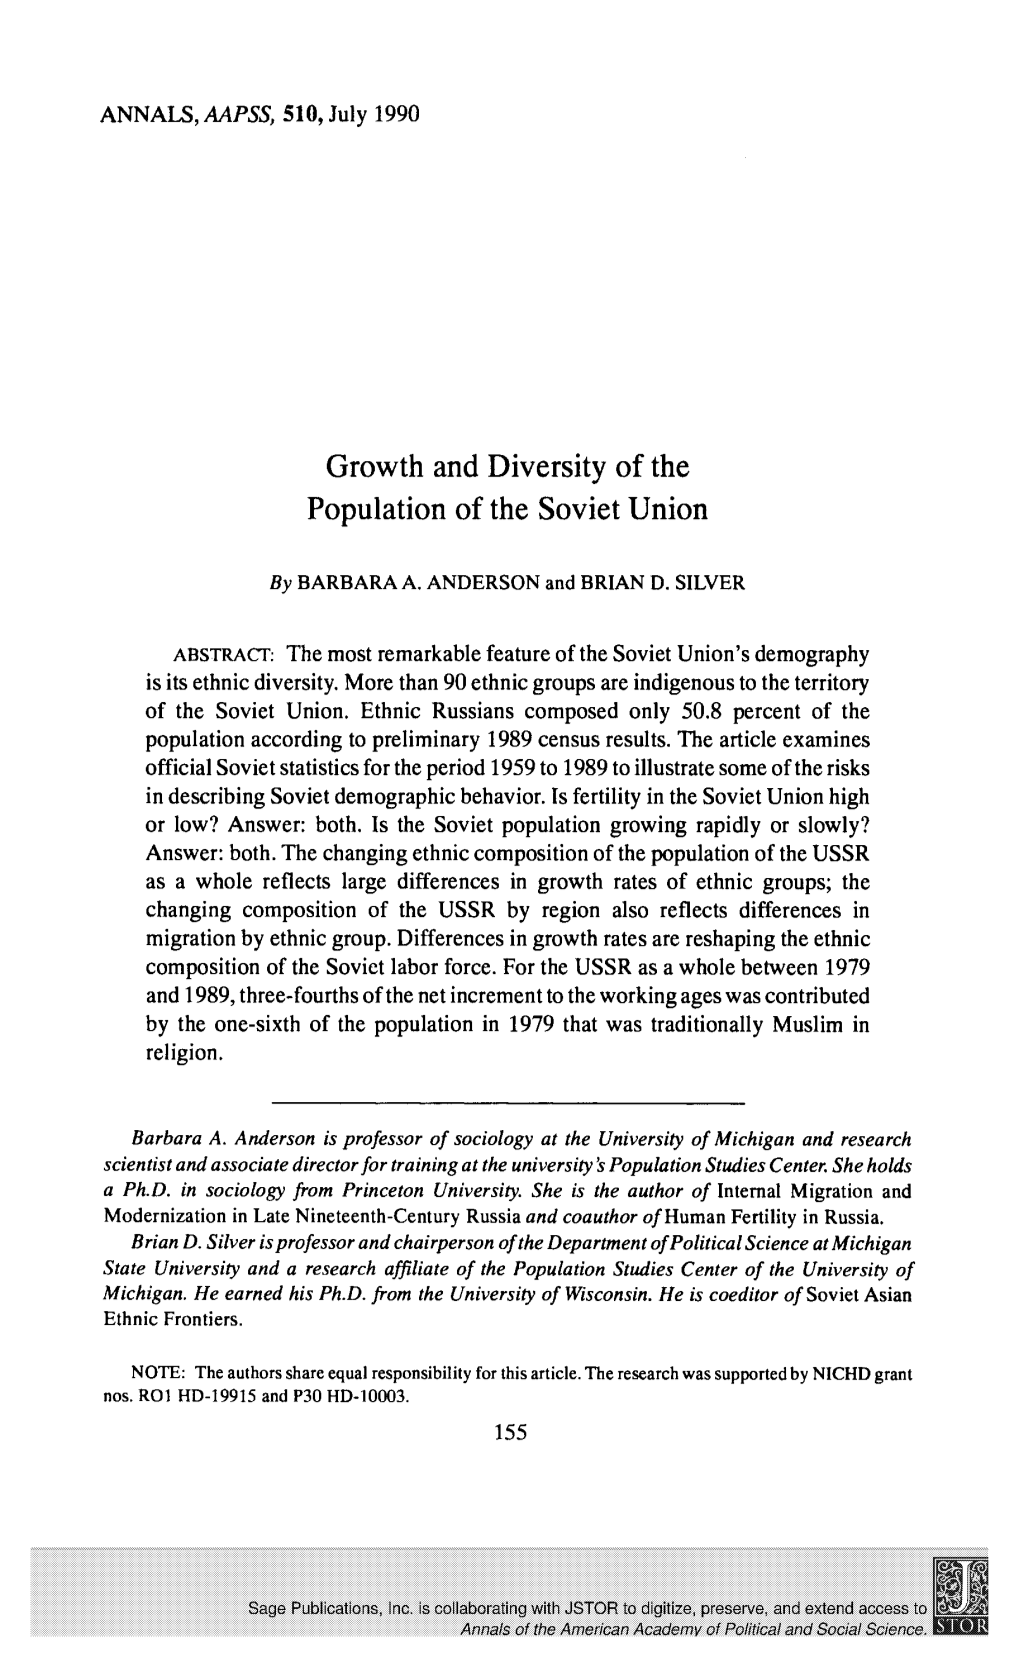 Growth and Diversity of the Population of the Soviet Union